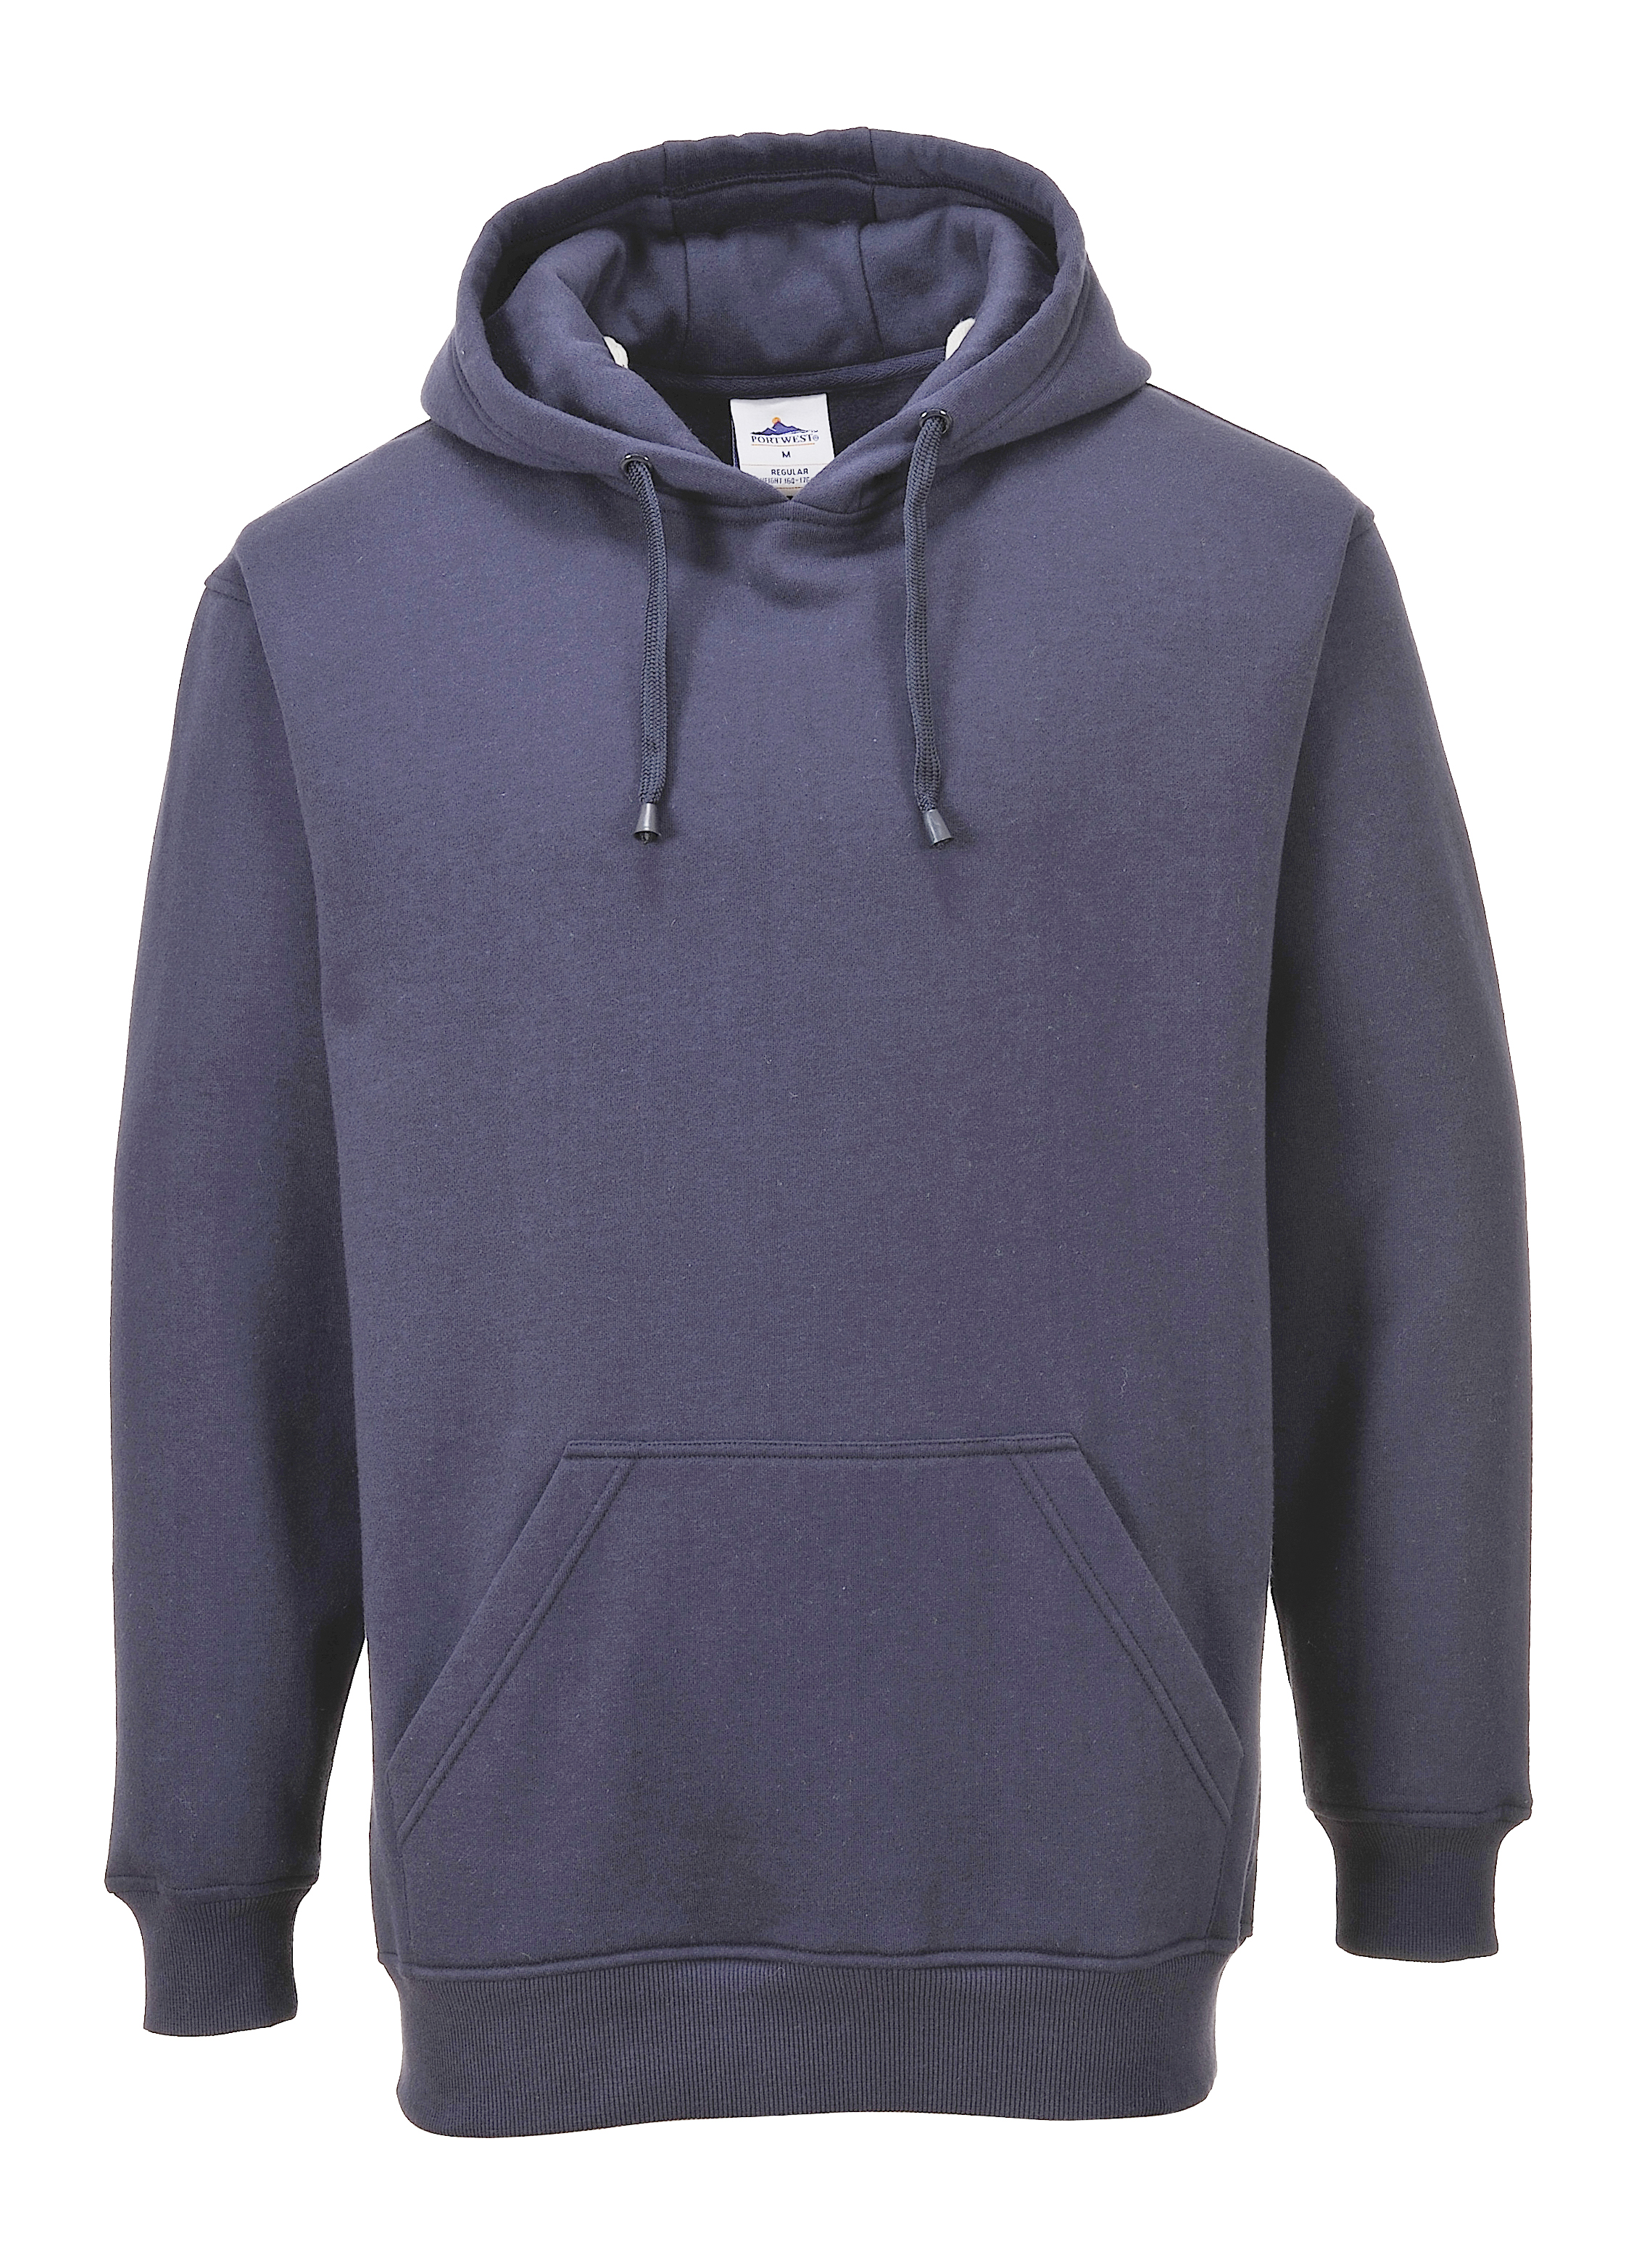 ax-httpss3.eu-west-2.amazonaws.comwebsystemstmp_for_downloadportwest-roma-hoody-navy.jpeg